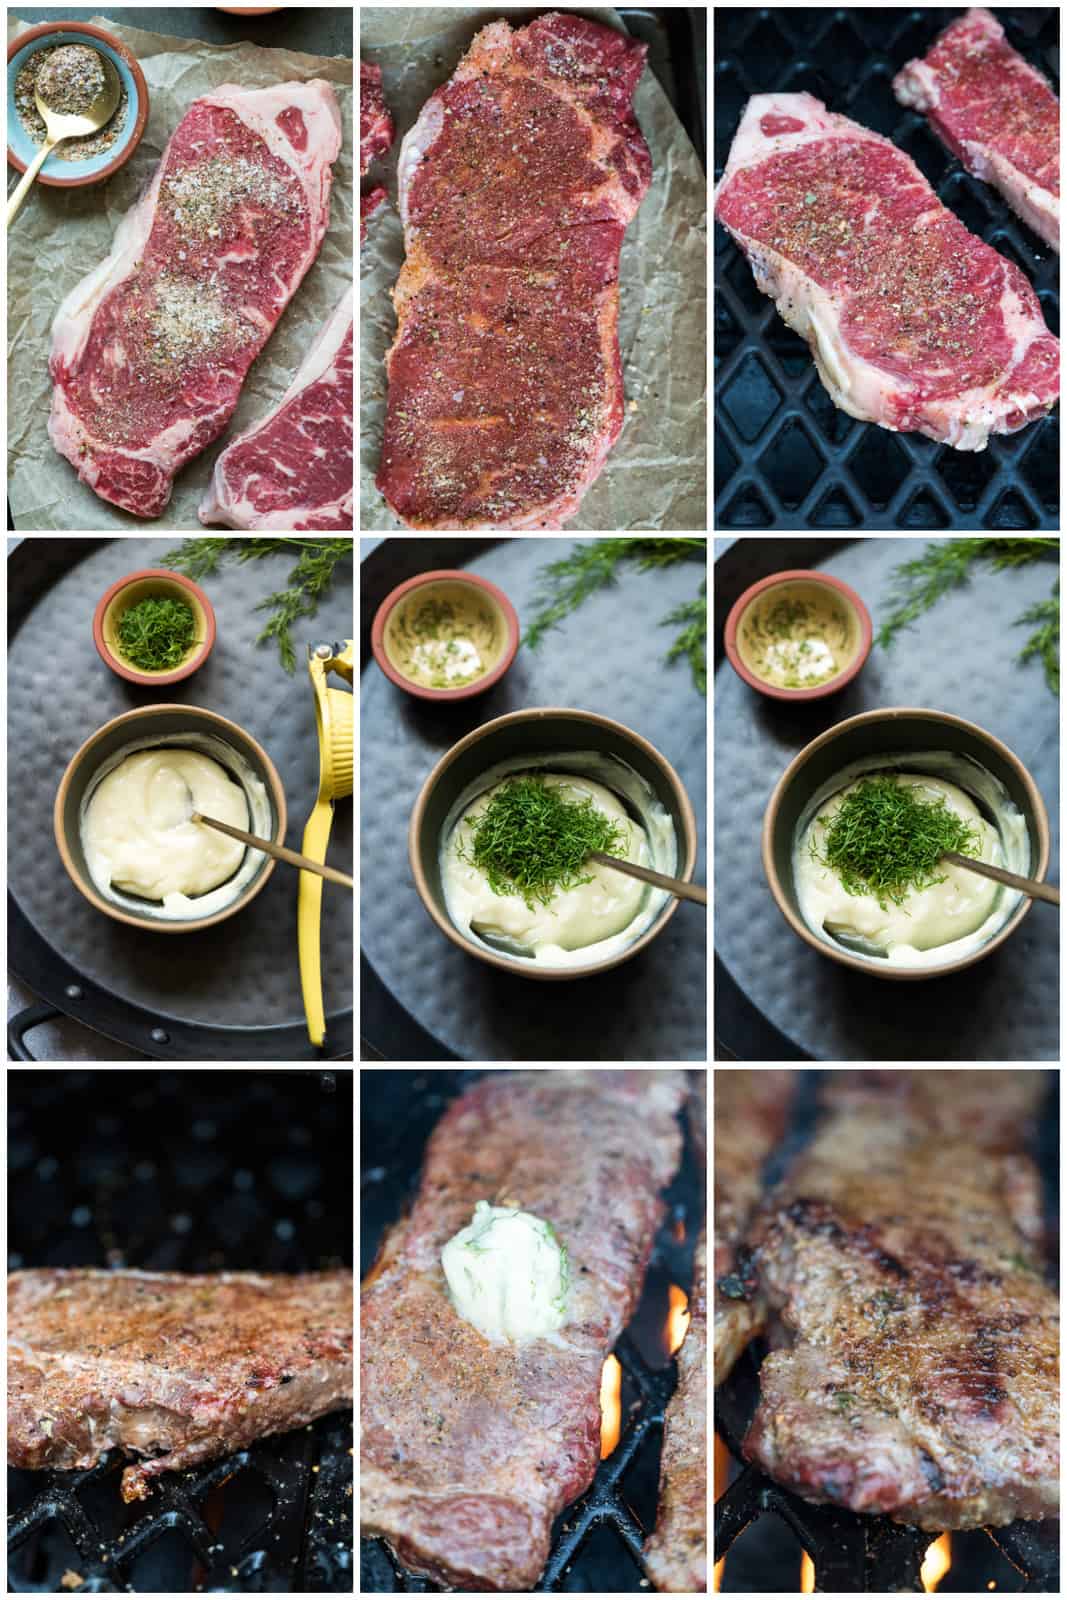 Step by step photos on how to make Smoked Steak.